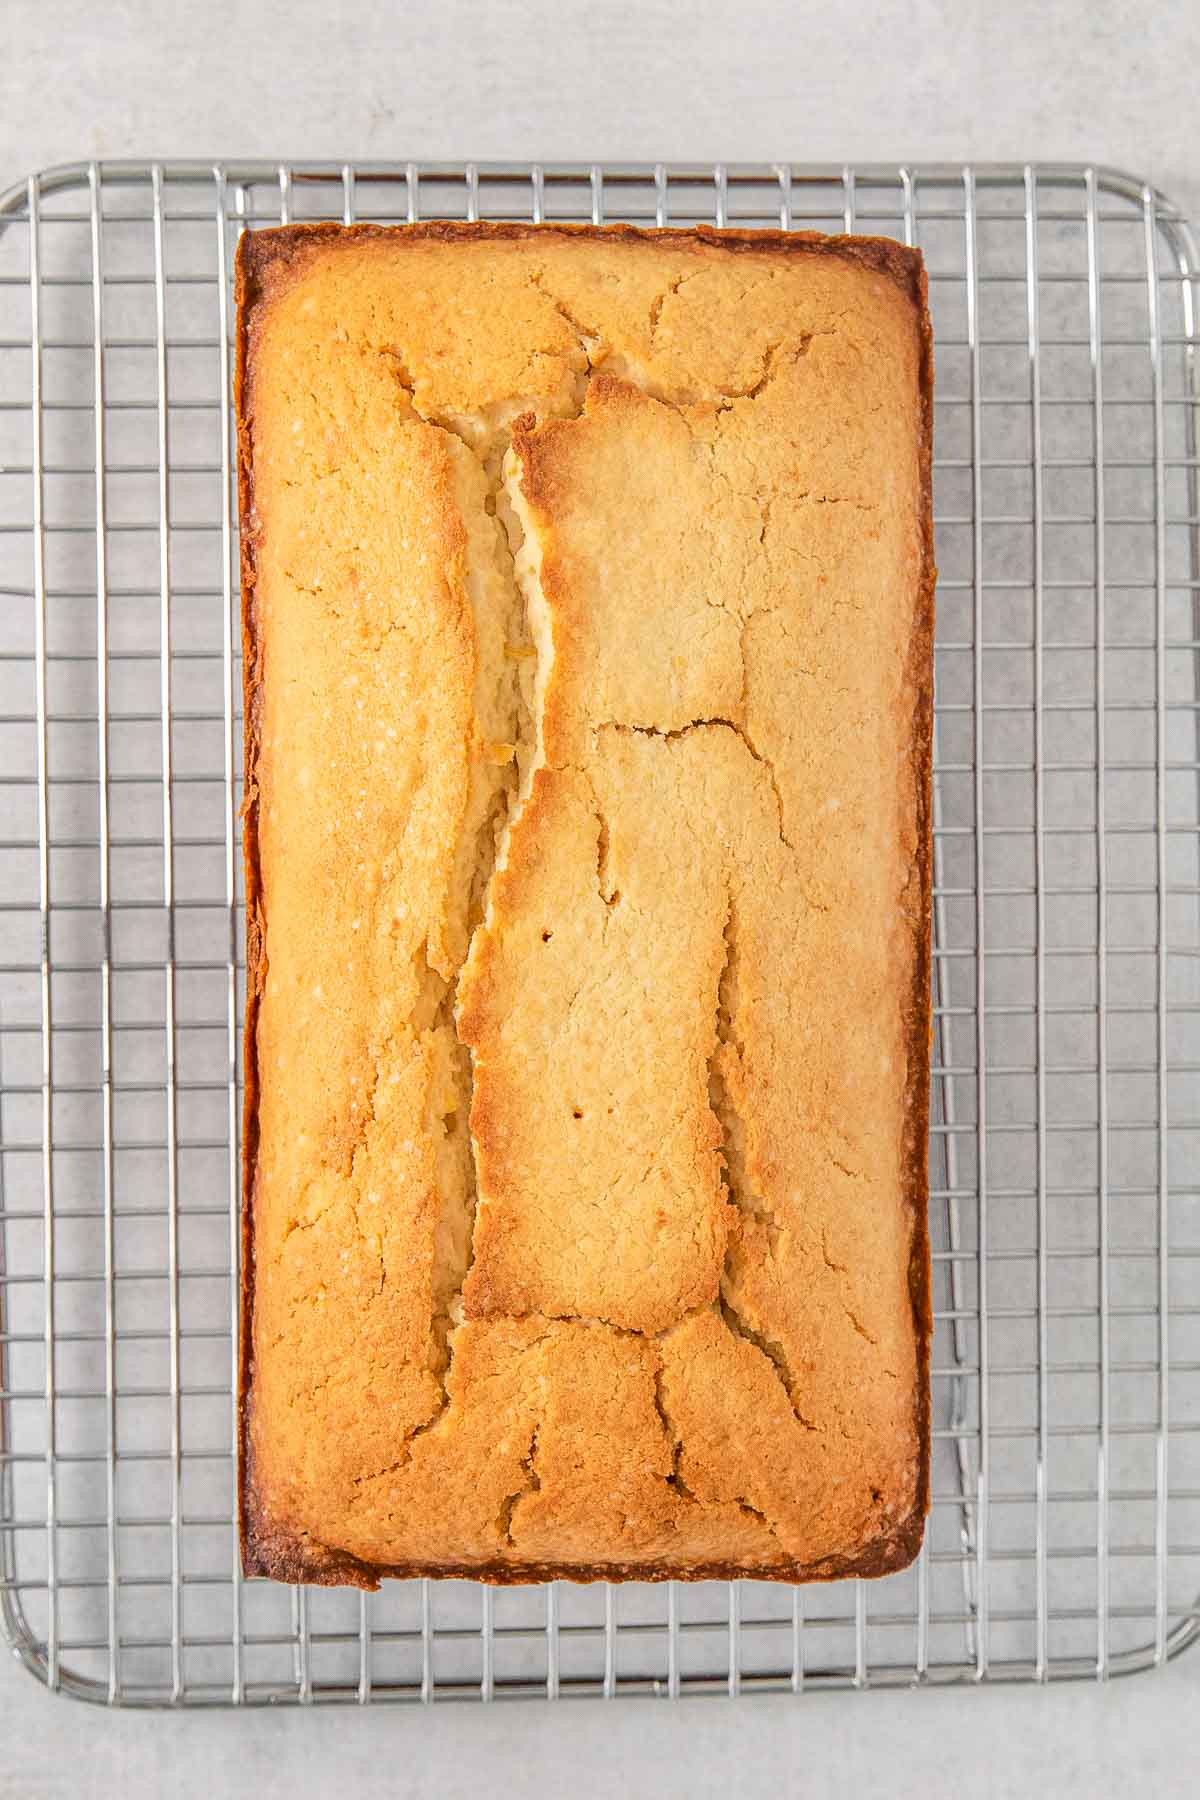 Baked lemon pound cake on wire cooling rack.